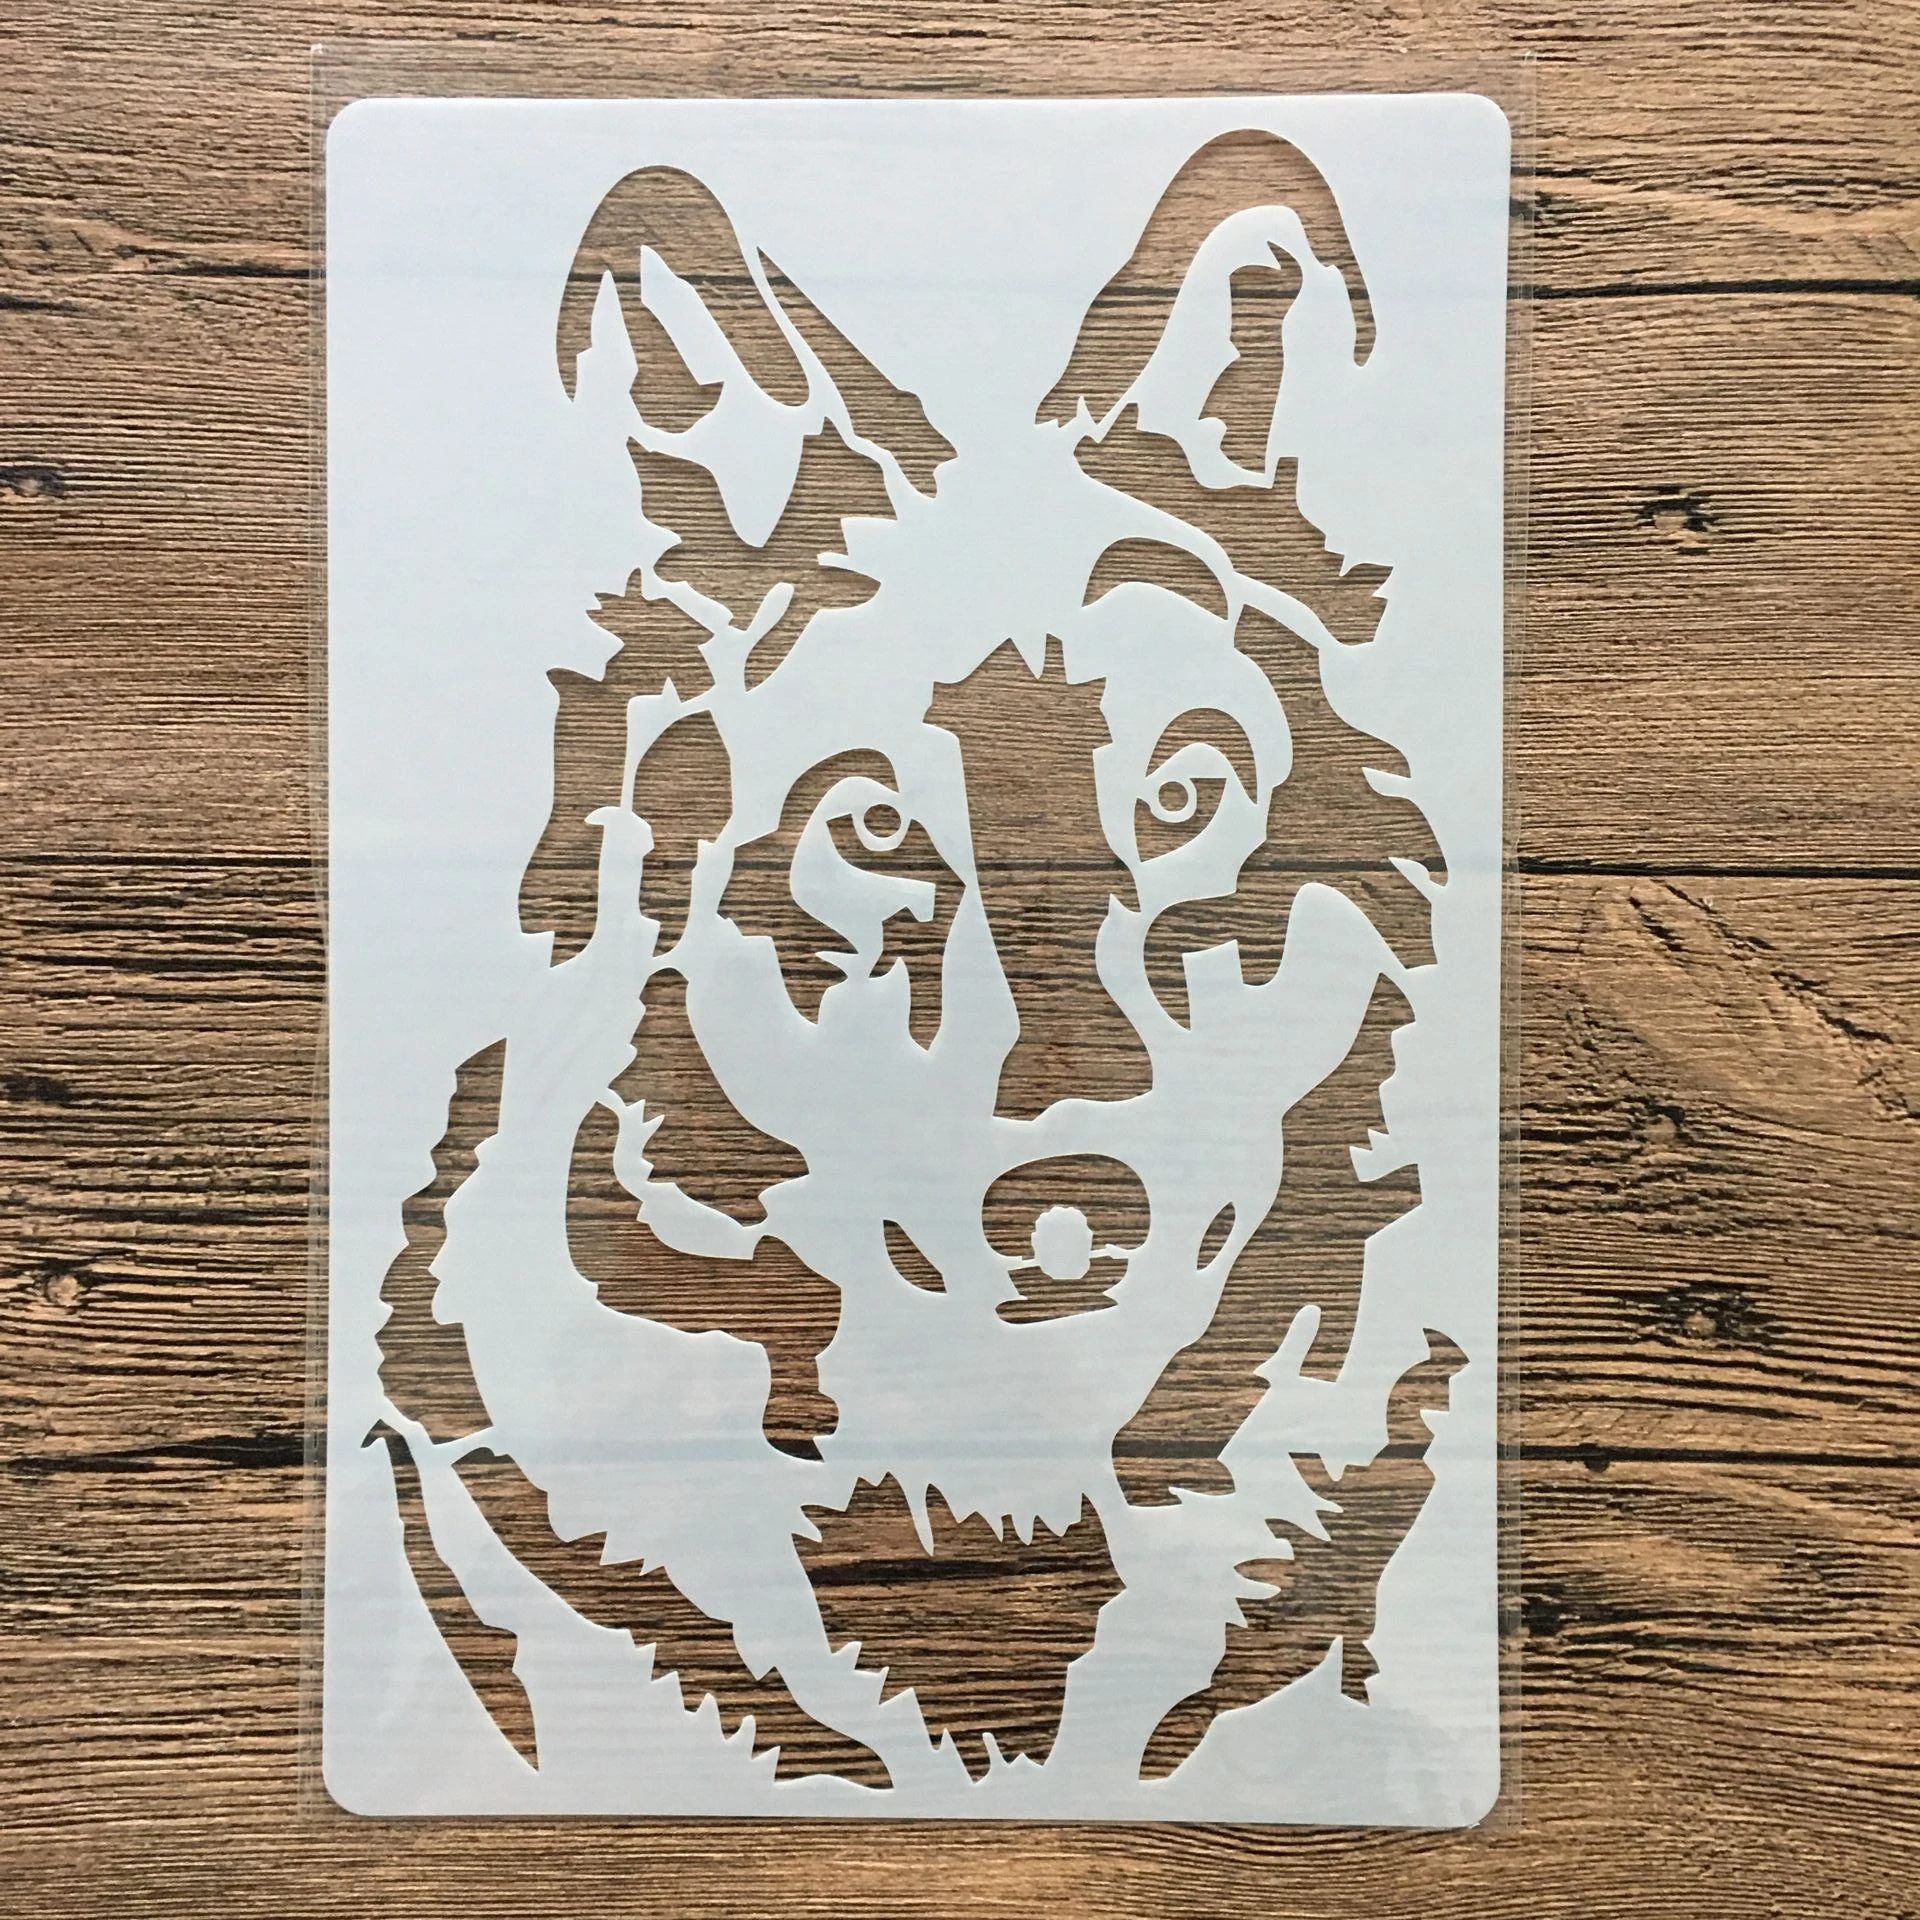 A4 21*29 cm Animal dog Stencils  DIY Craft Layering Stencils For Walls Painting Scrapbooking Stamping Stamp Album Decorative